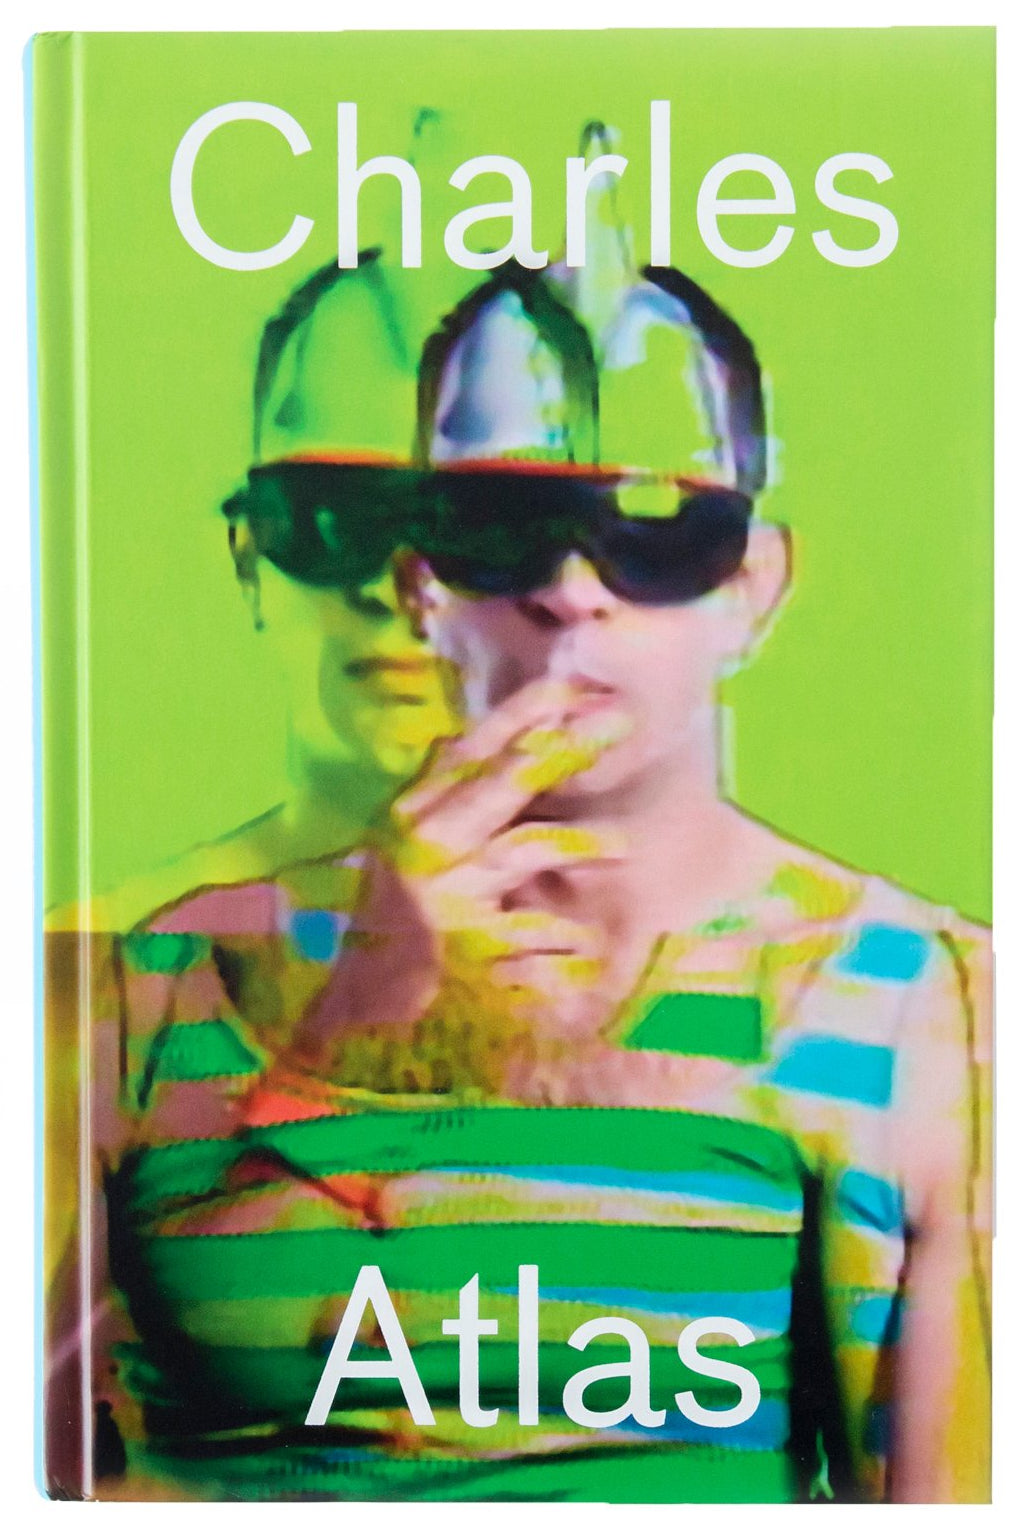 Cover of Charles Atlas's catalog for the artist's 2018 exhibition at the Museum für Gegenwartskunst.